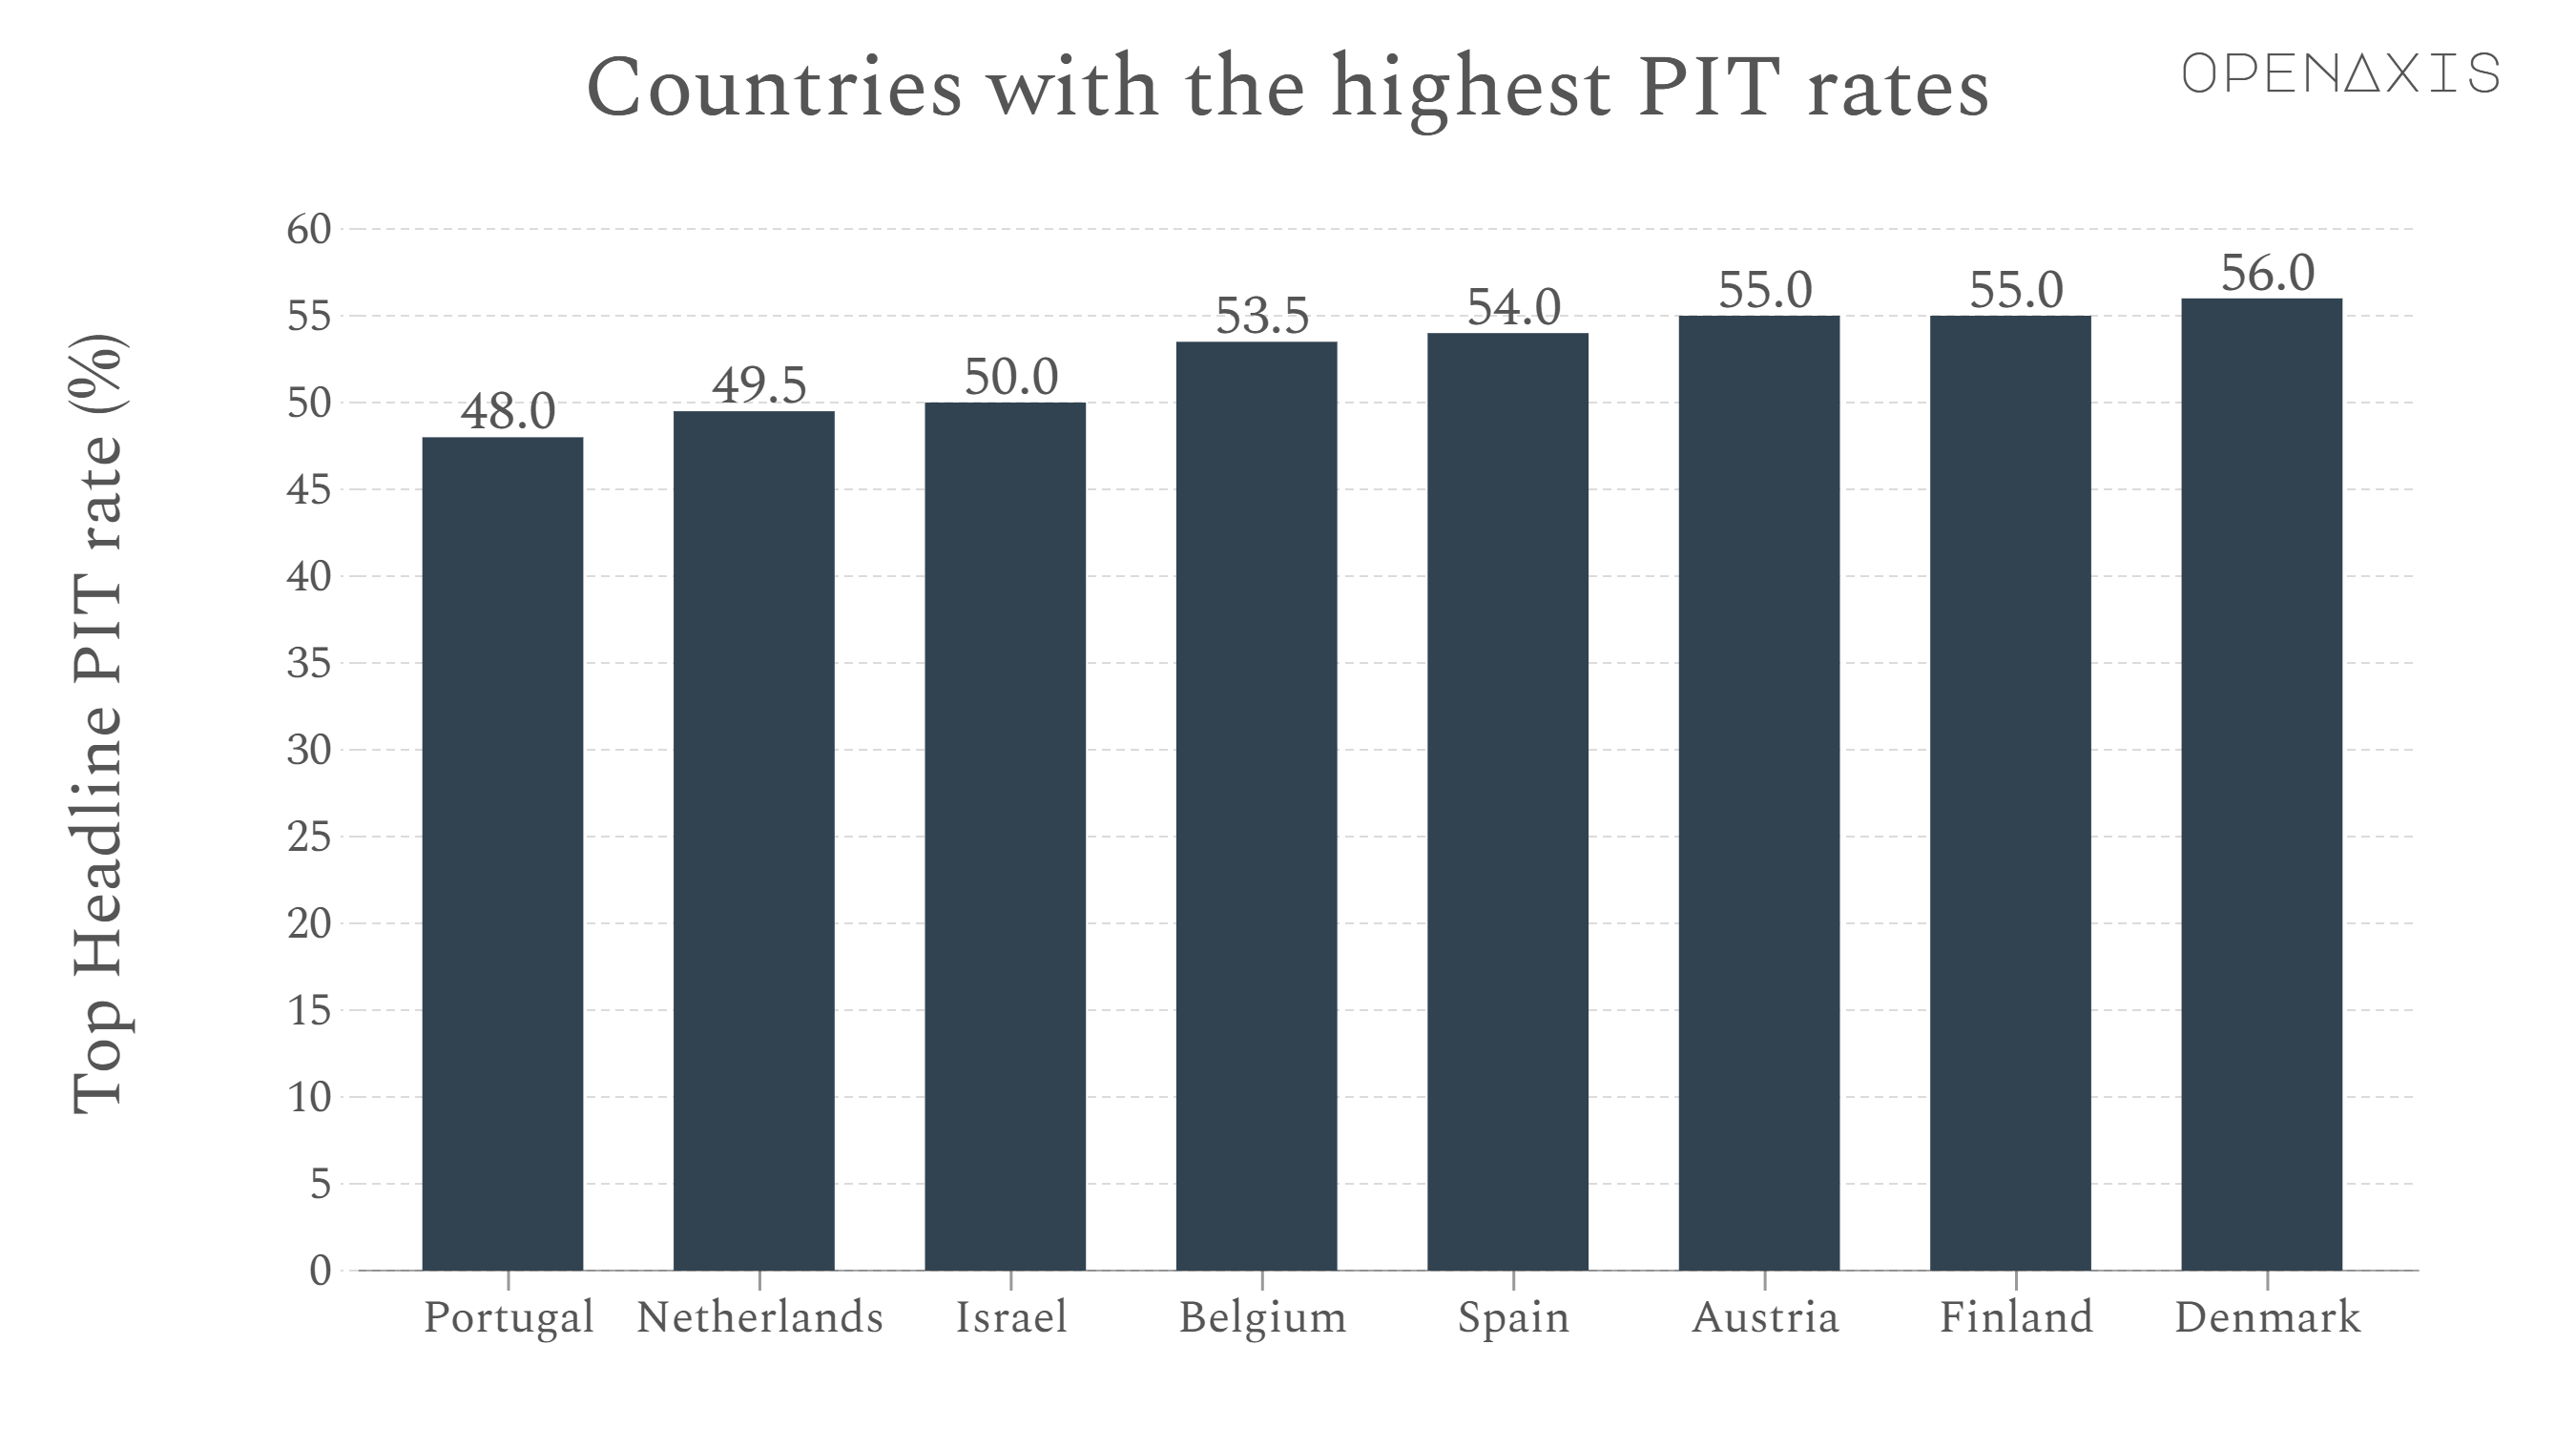 "Countries with the highest PIT rates"